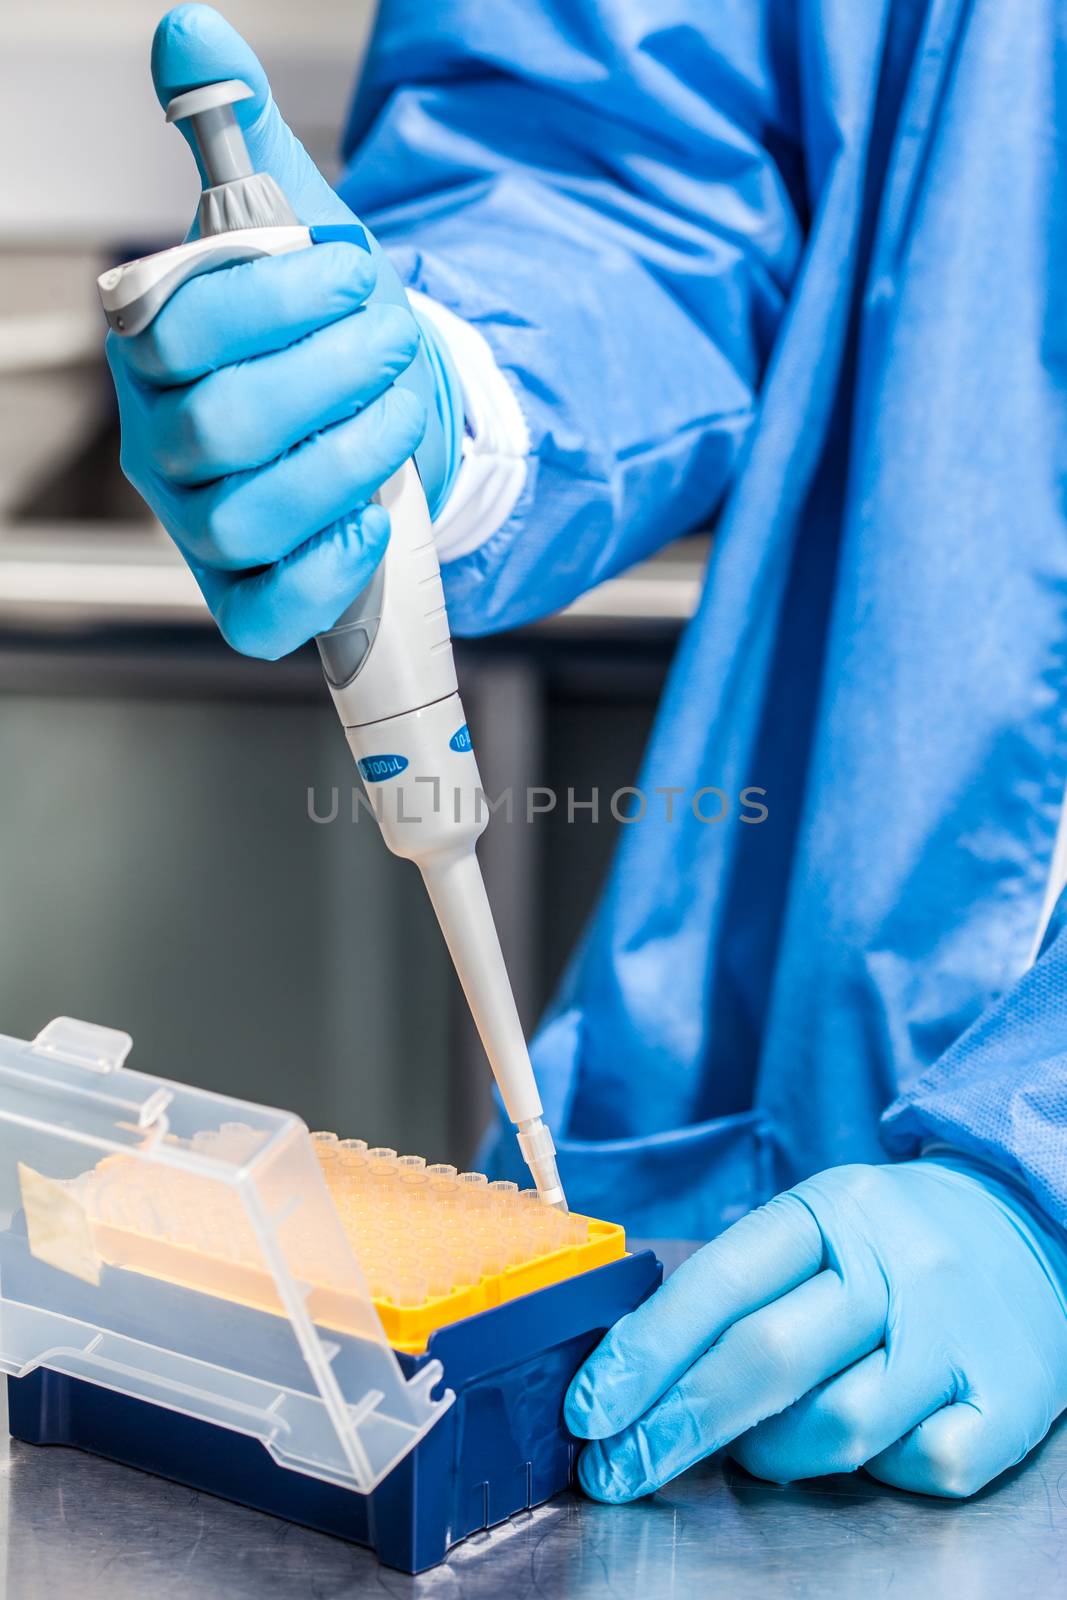 Scientist attaching a disposable tip to a micropipette